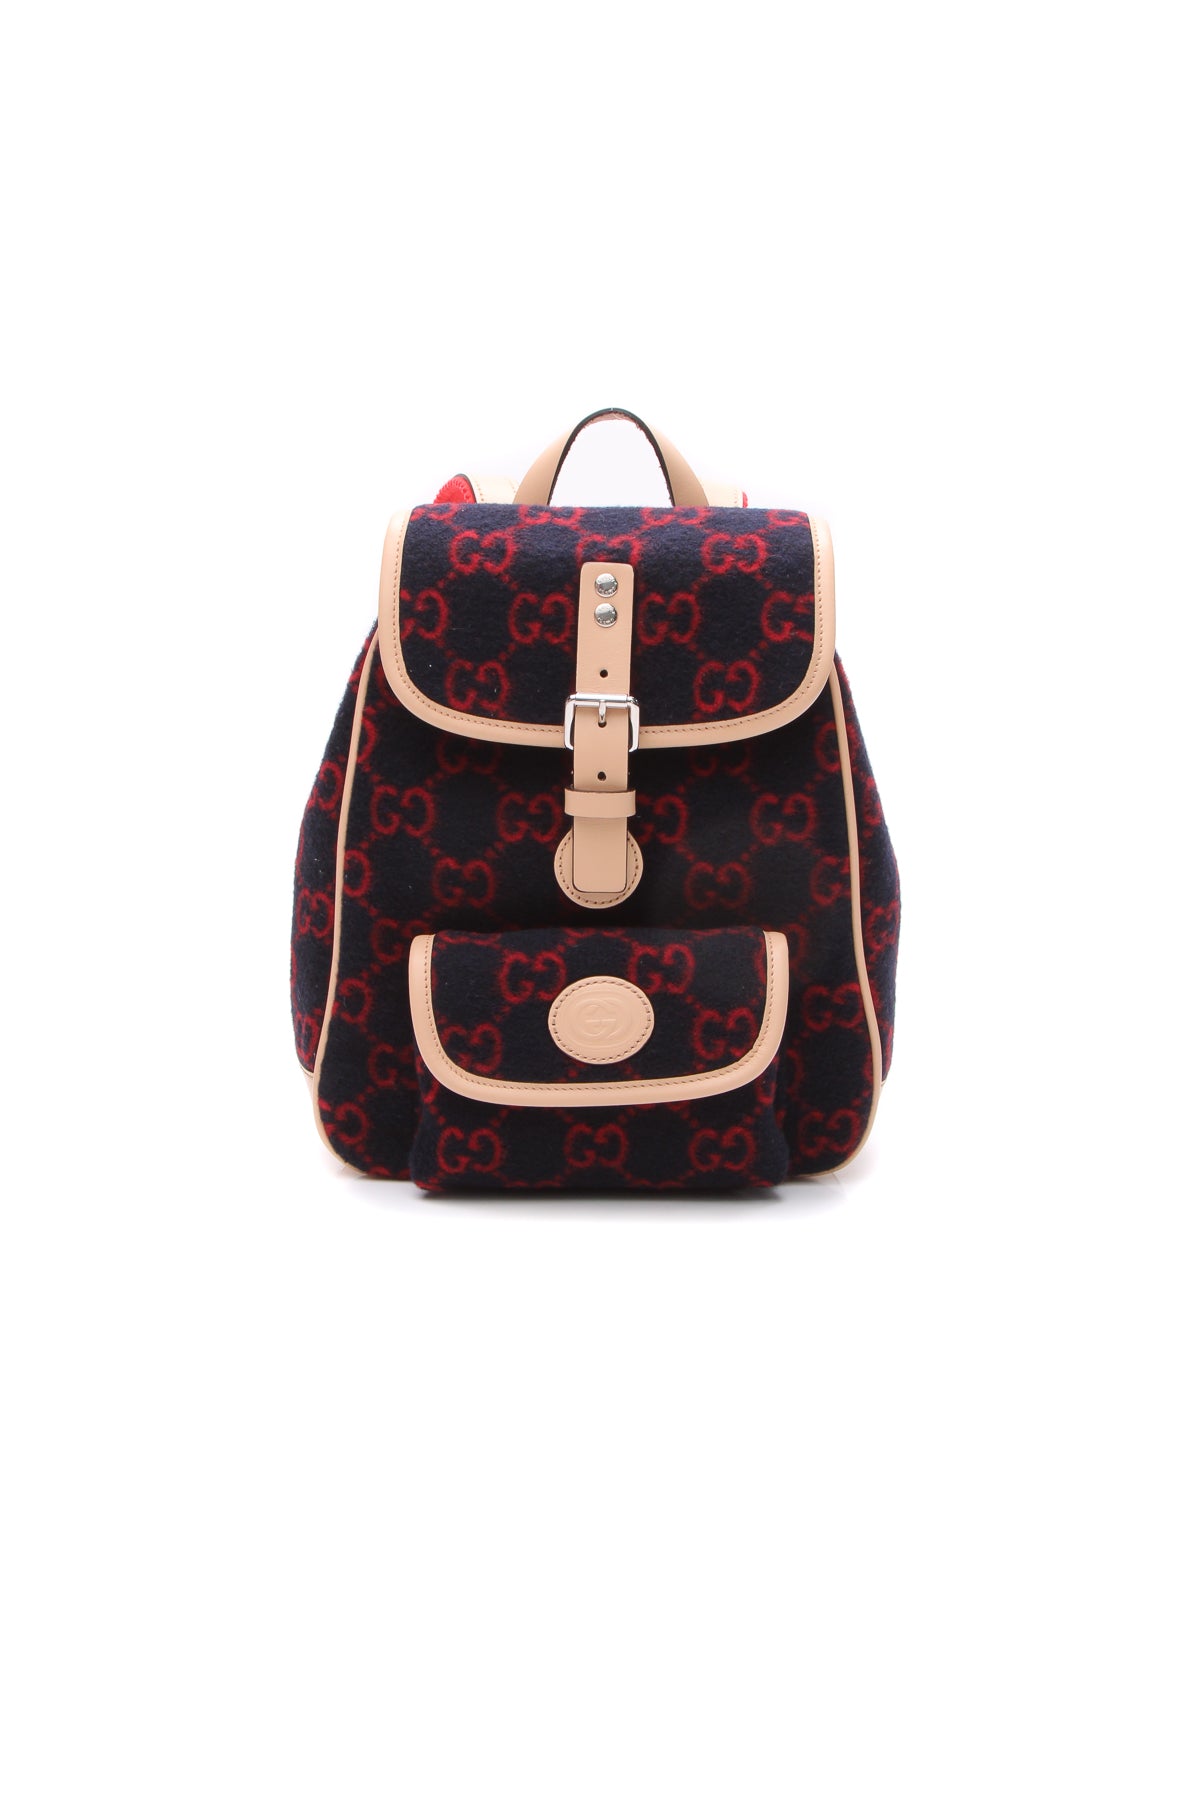 Gucci Wool Children's Backpack - Navy/Red - Couture USA